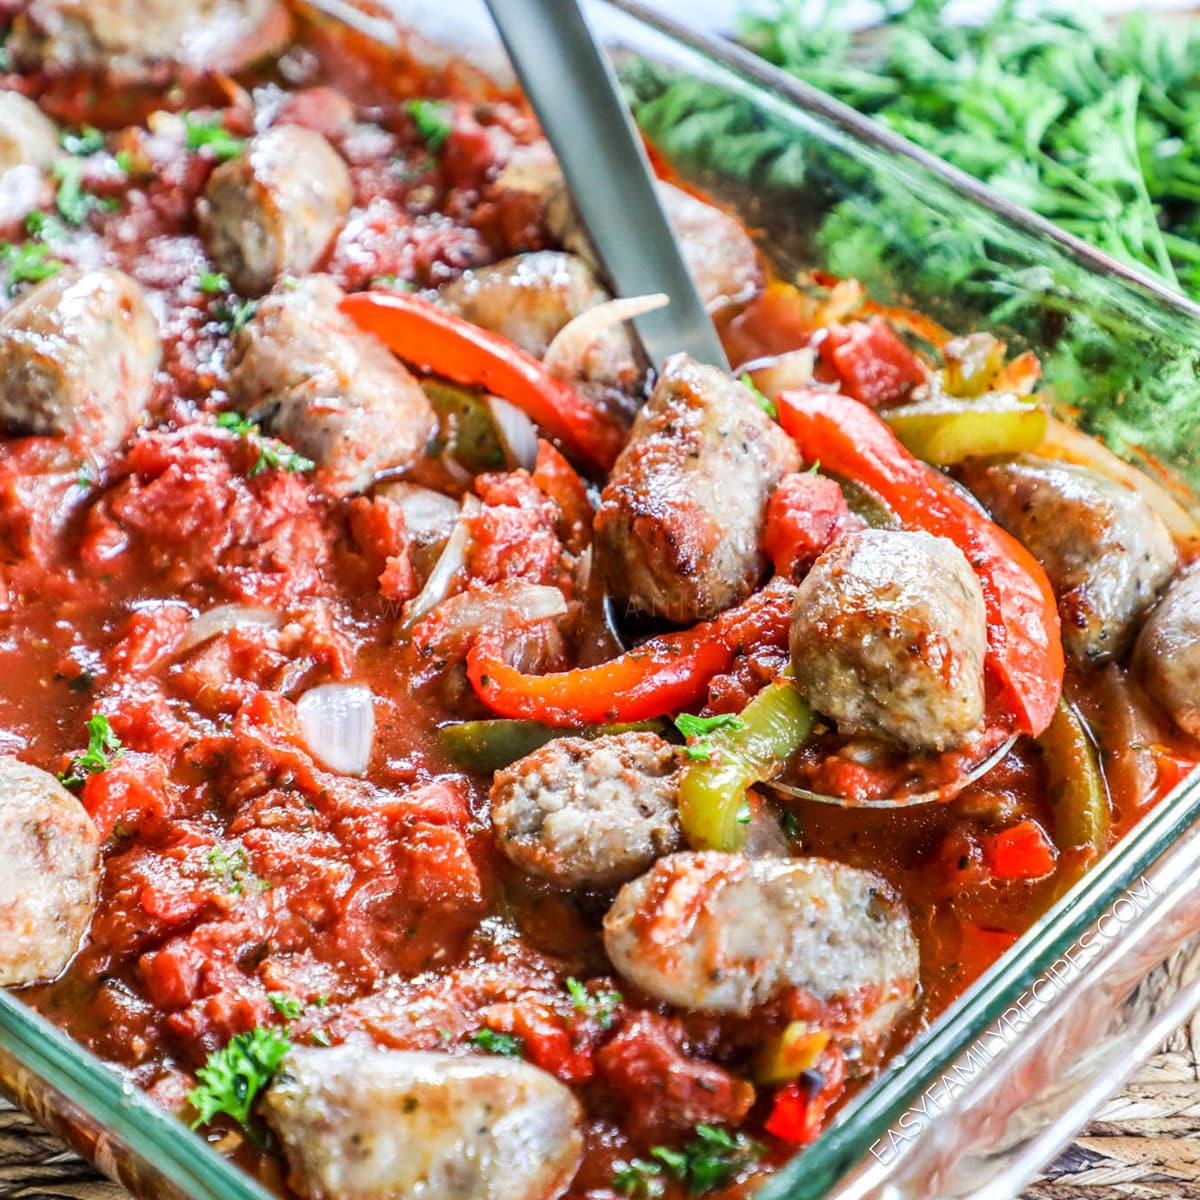 Baked Italian Sausage and Peppers